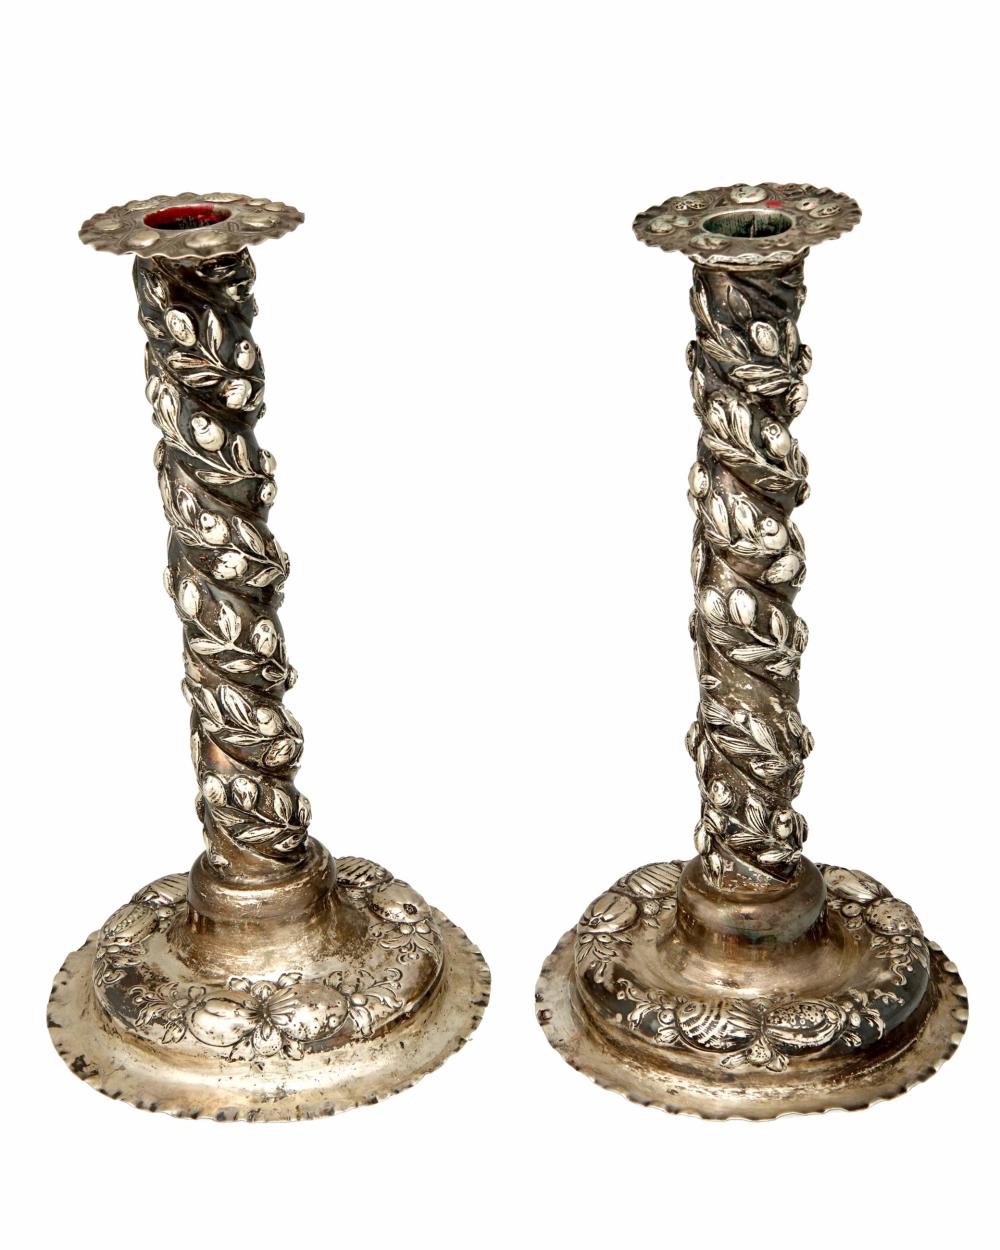 A PAIR OF MEXICAN STERLING SILVER